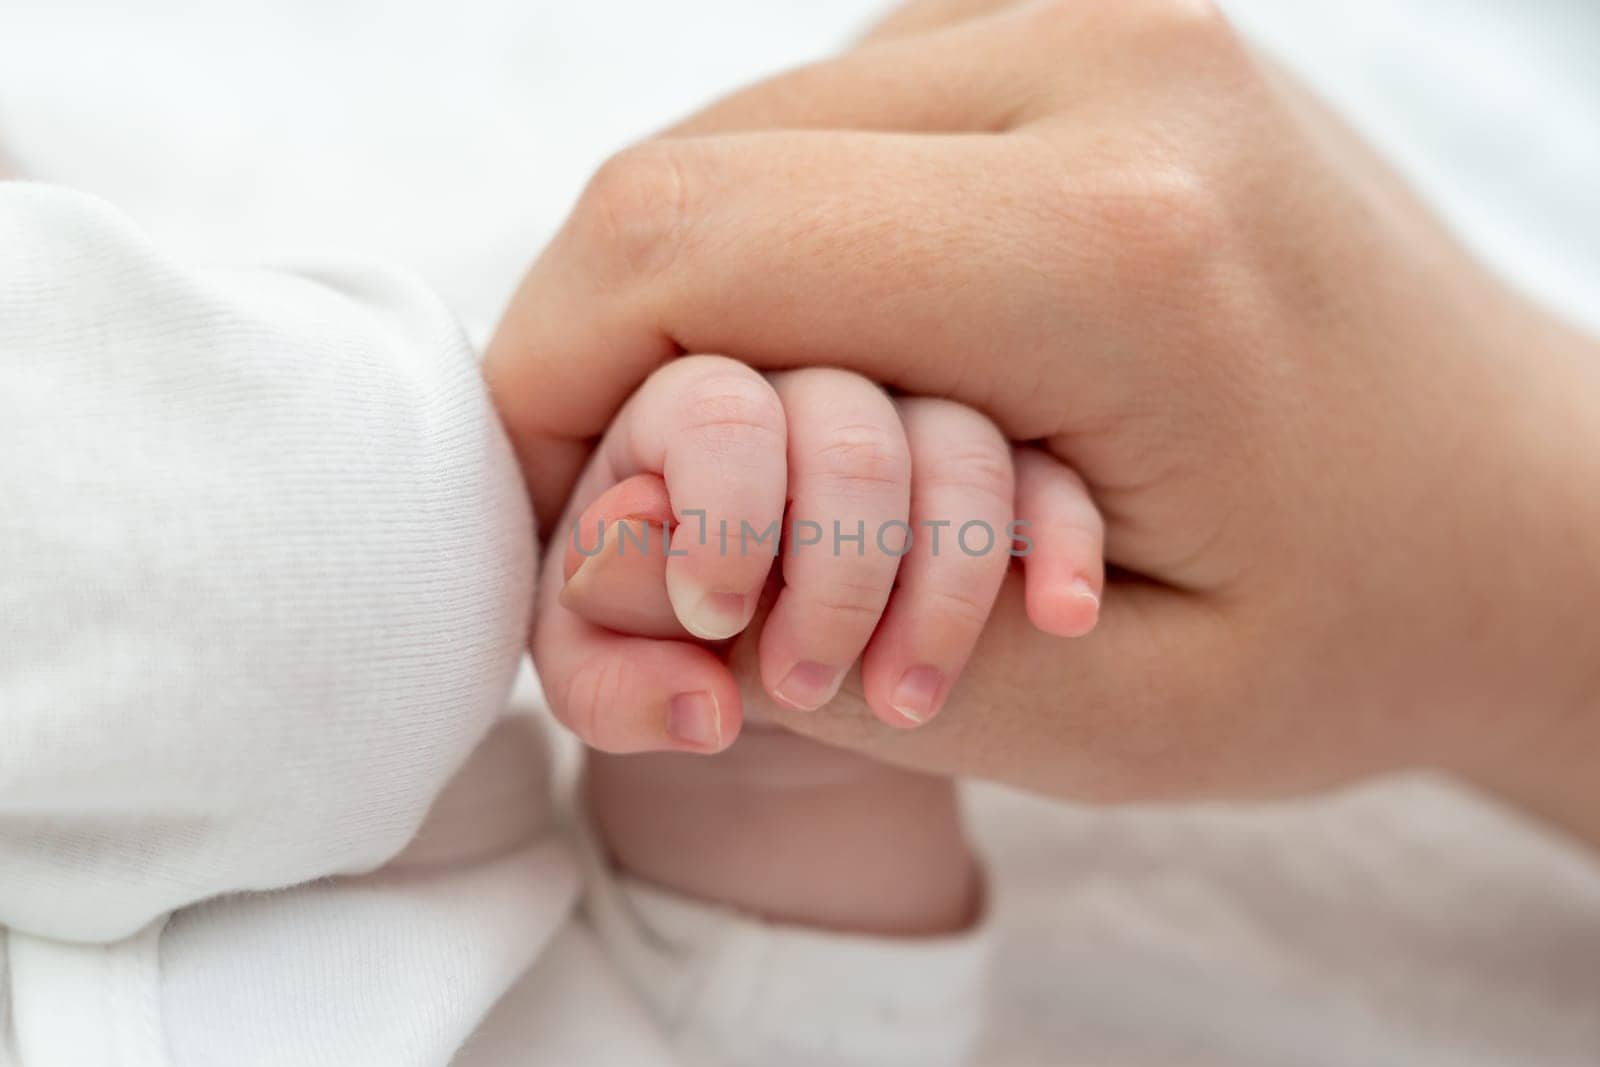 Newborn's delicate grip on mother's thumb exudes trust. Concept of pure maternal connection by Mariakray